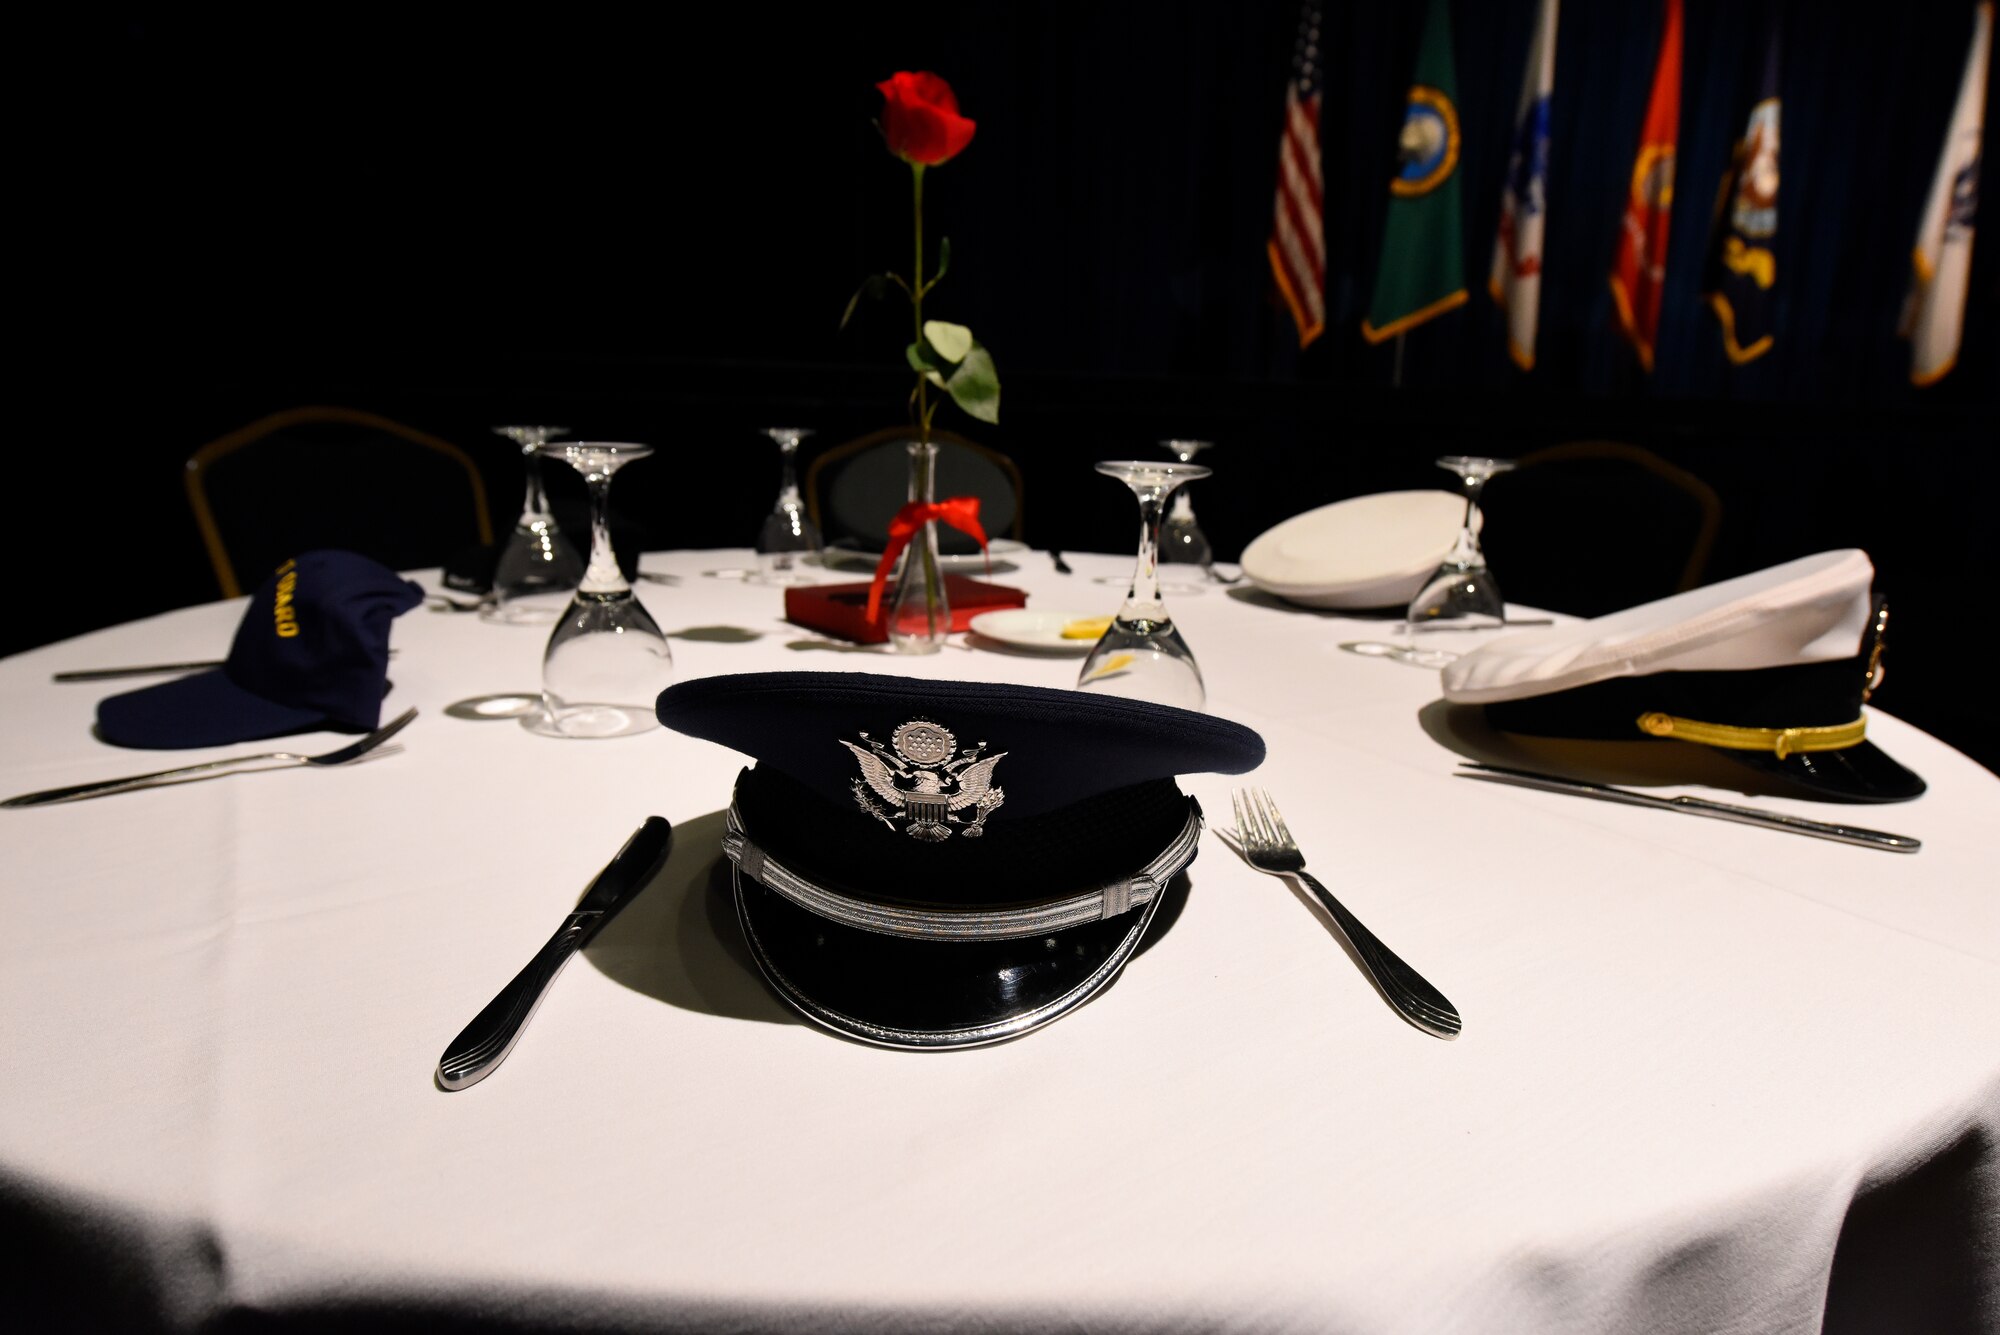 A table in memory of U.S. military prisoners of war and those missing in action stands near the stage at Fairchild's Air Force Ball at Northern Quest Resort and Casino in Airway Heights, Washington, Sept. 15, 2018. The tradition of setting a separate table in honor of POWs and MIA has been in place since the end of the Vietnam War. (U.S. Air Force photo/Airman 1st Class Lawrence Sena)